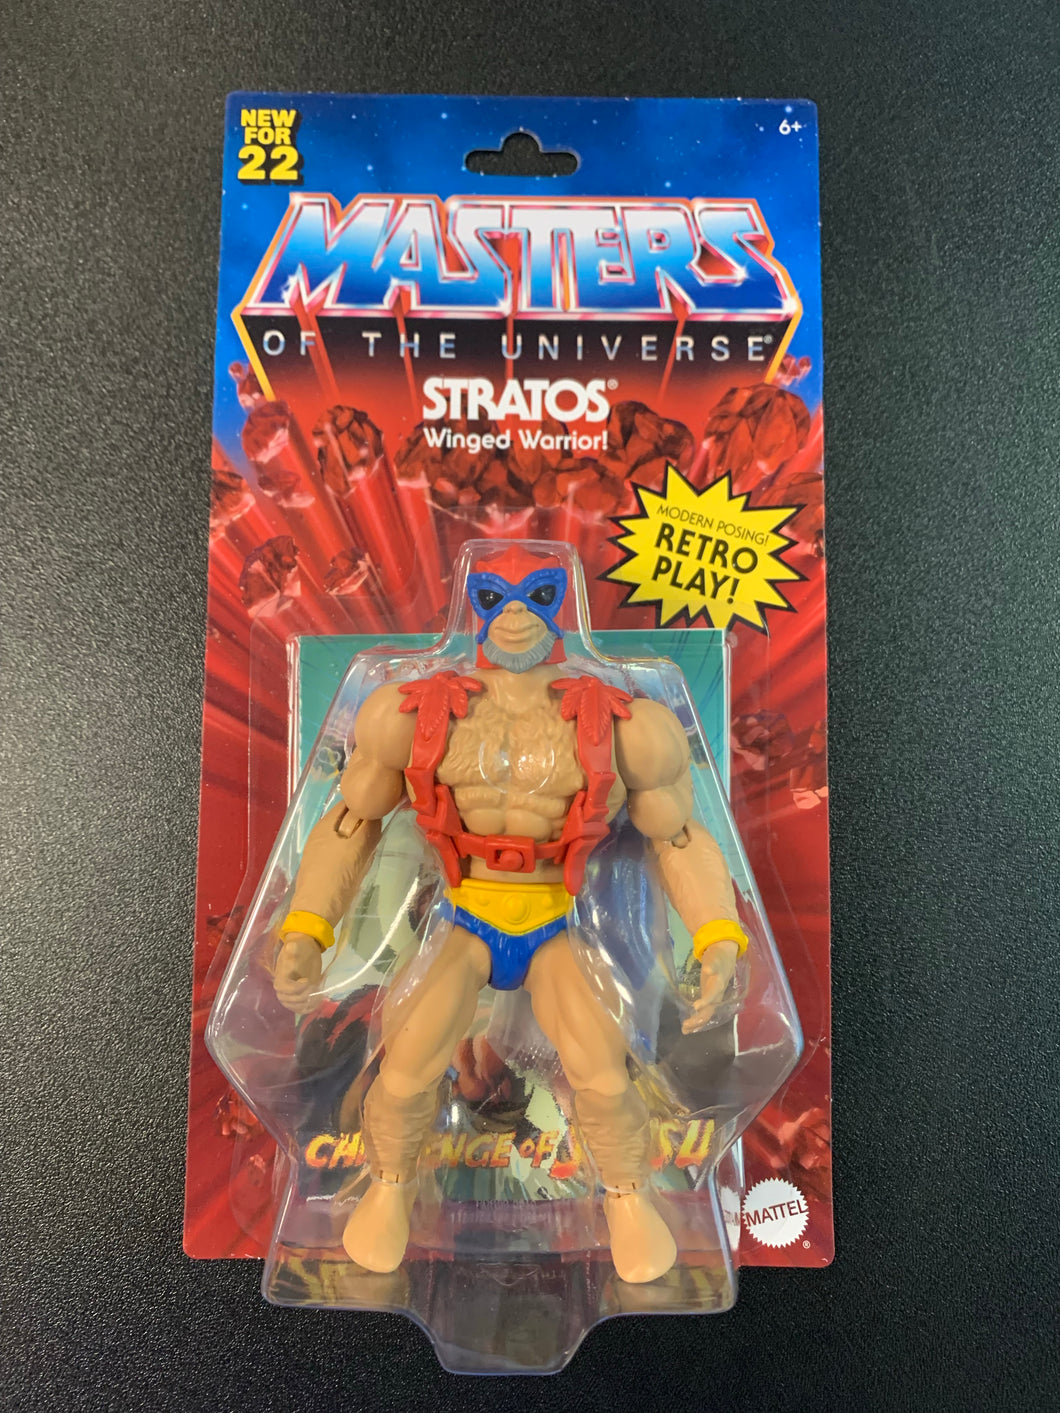 MATTEL MASTERS OF THE UNIVERSE STRATOS 2022